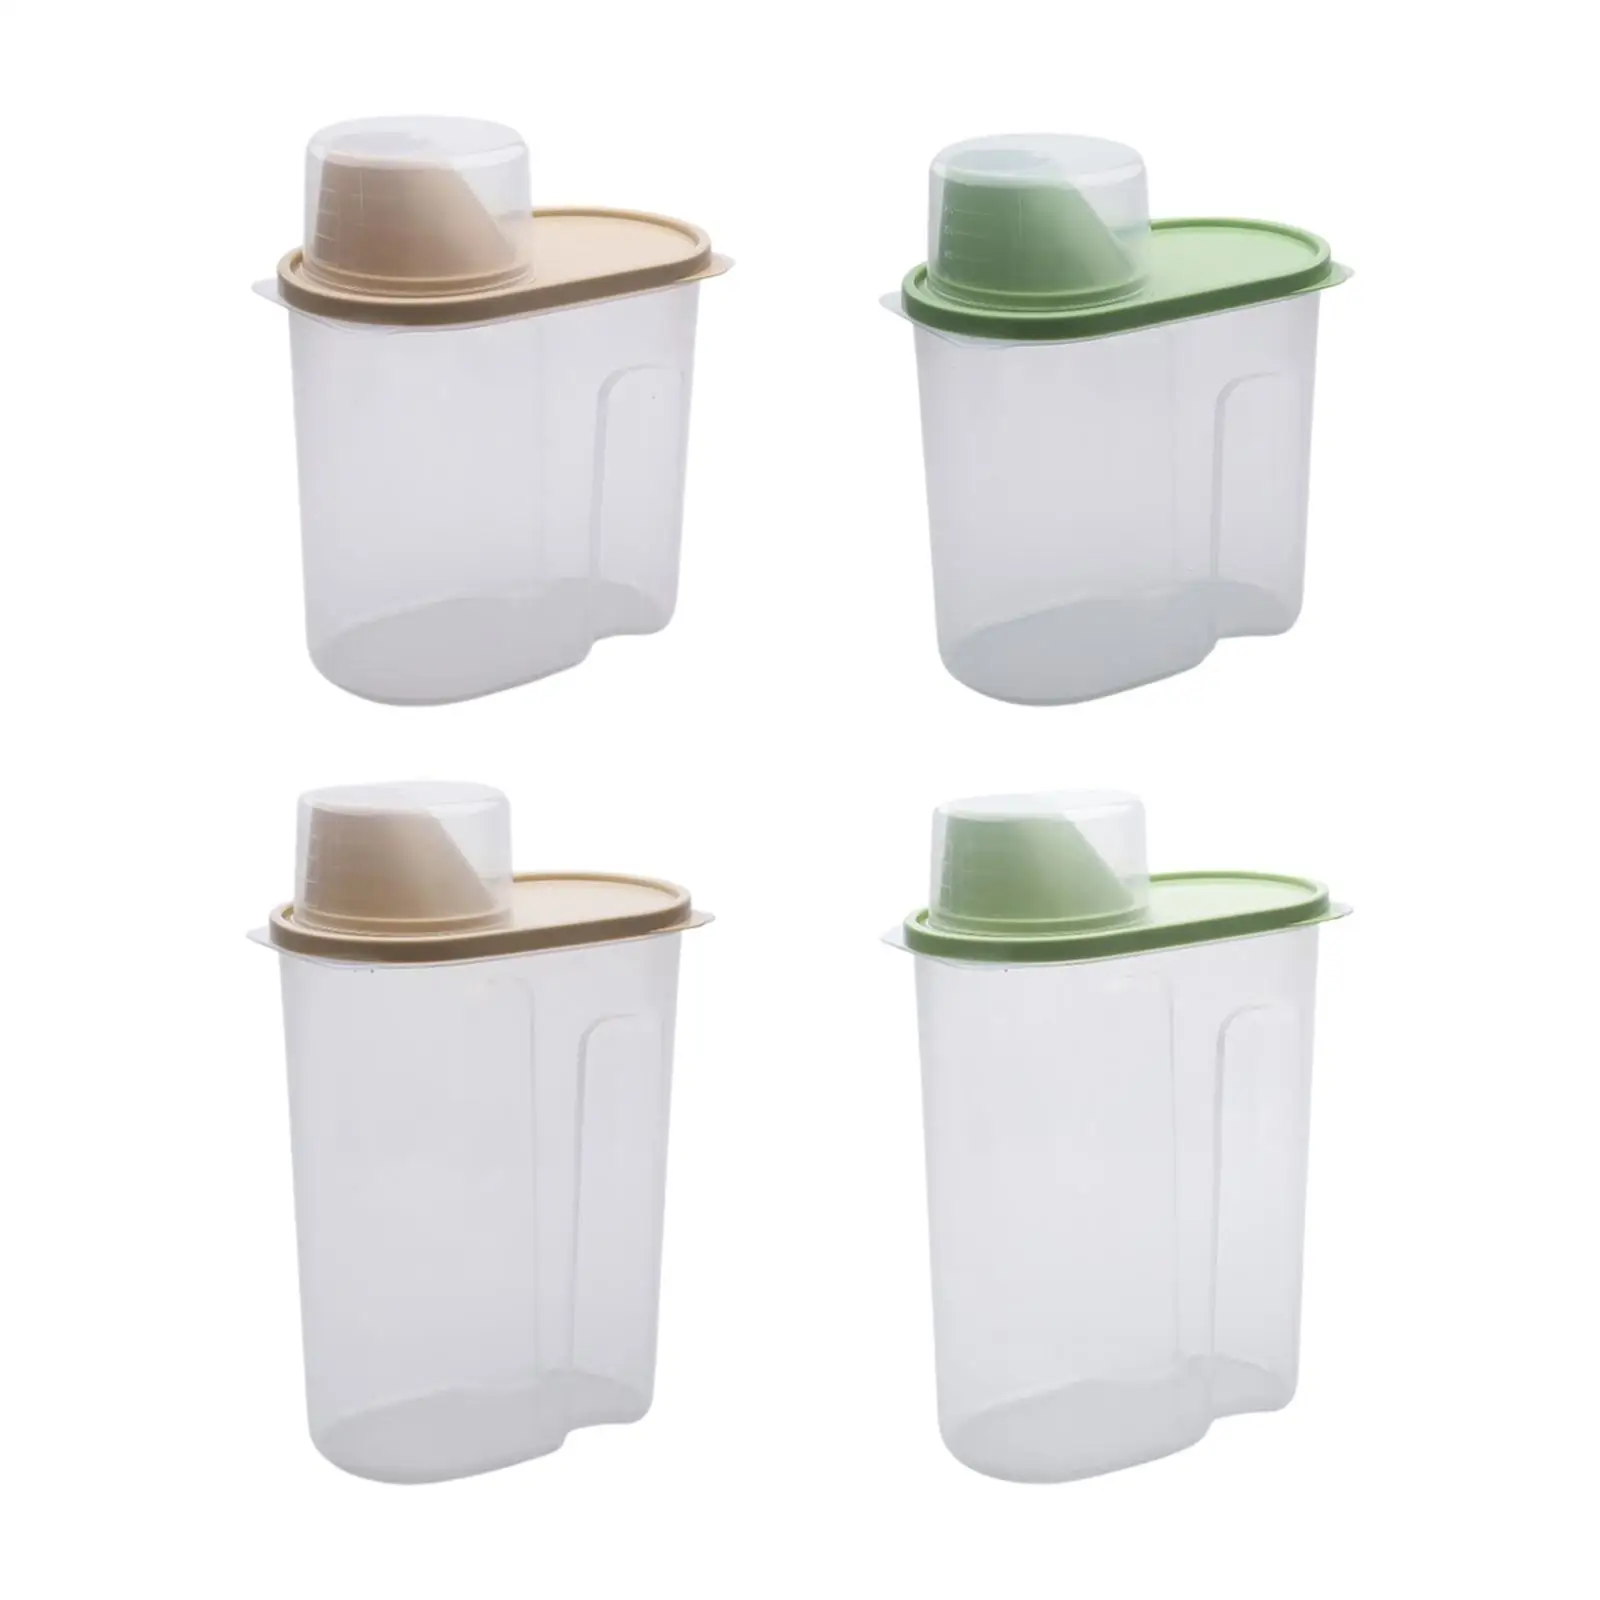 Dry Food Storage Container Pantry Organization for Grain Pasta Cookies